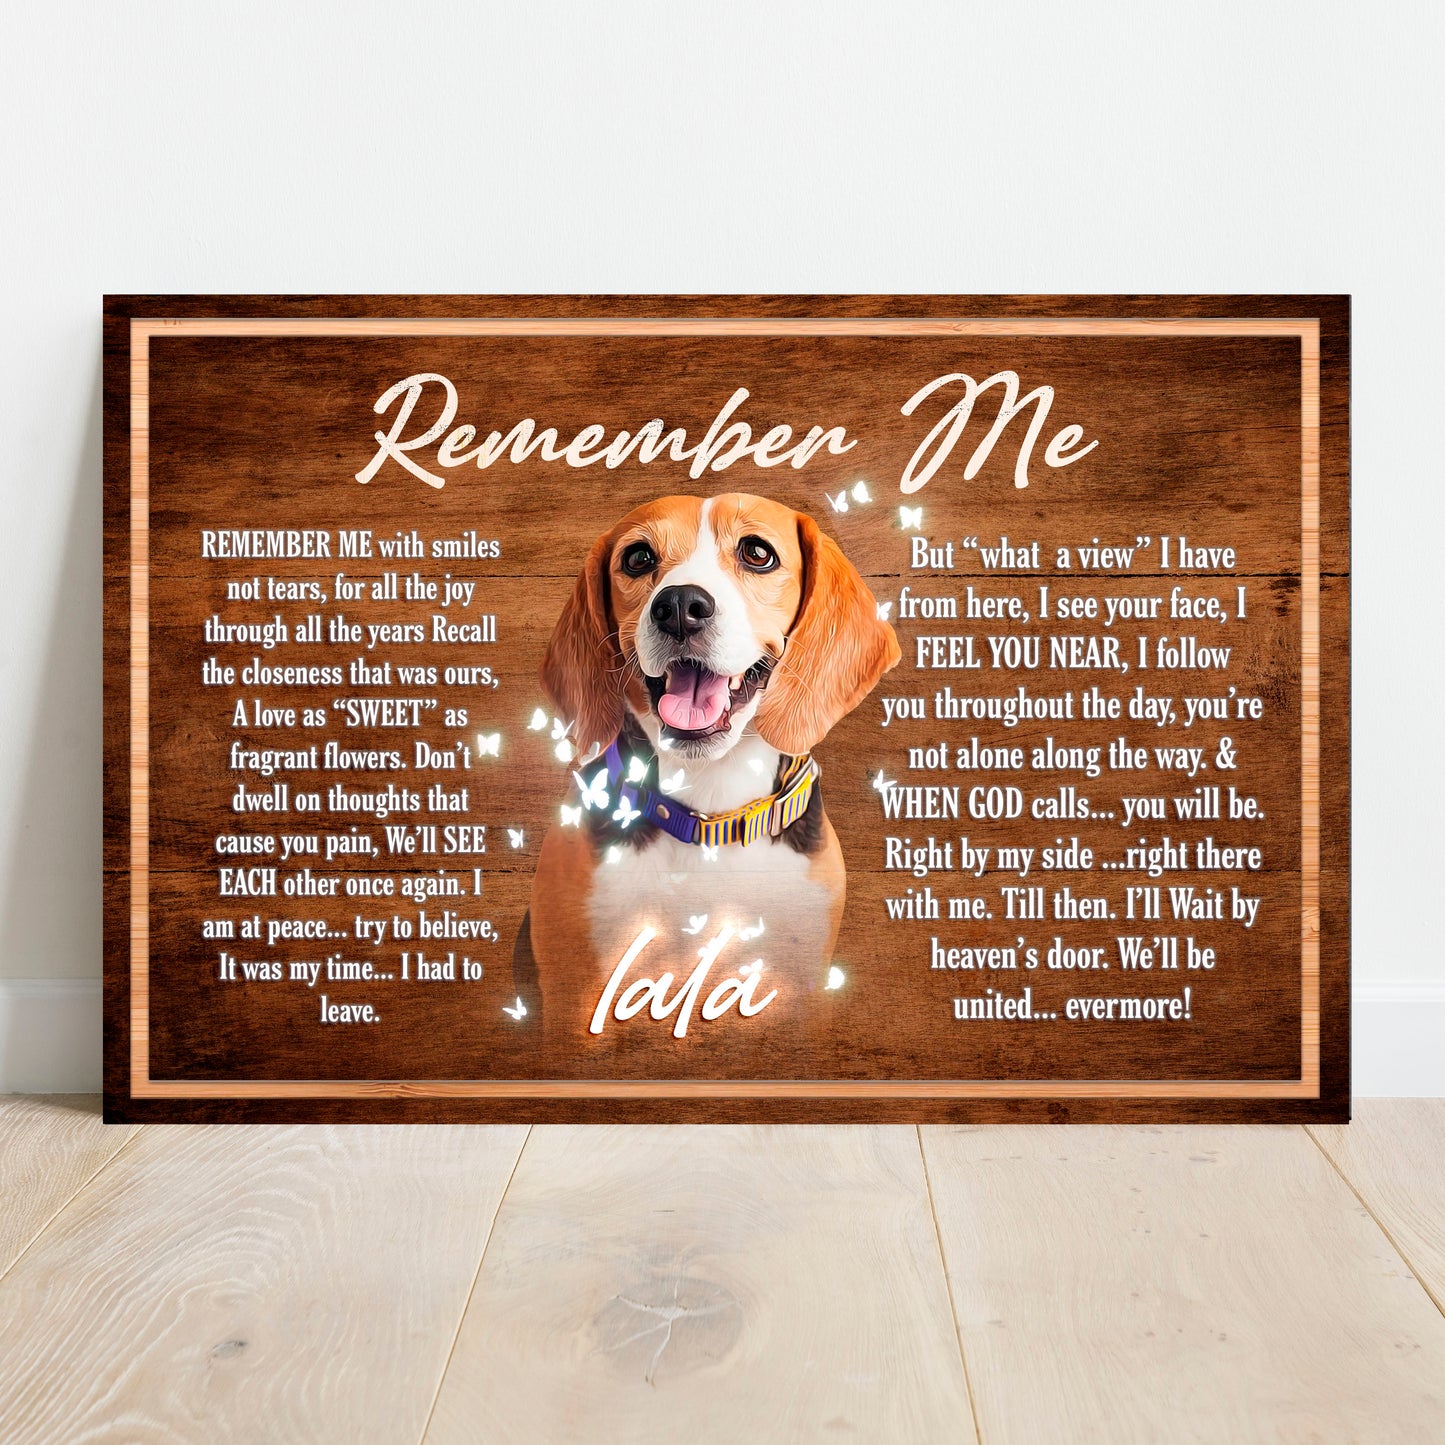 Remember Me, I'll Wait By The Heaven's Door Pet Memorial Sign Style 2 - Image by Tailored Canvases